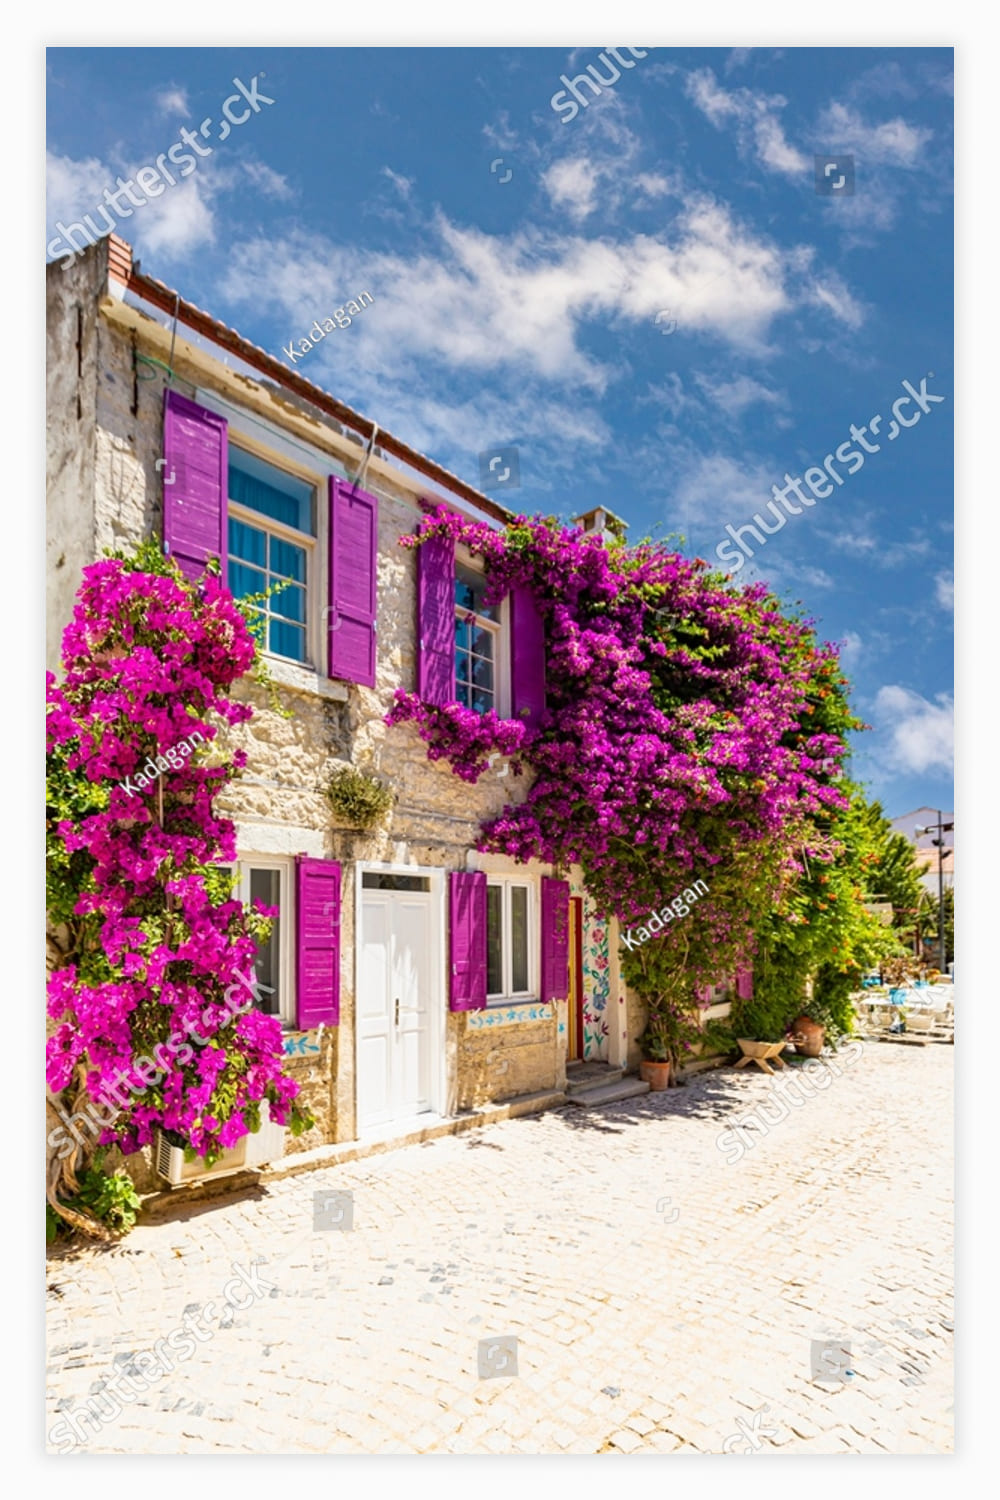 House with purple flowers growing on the side of it.